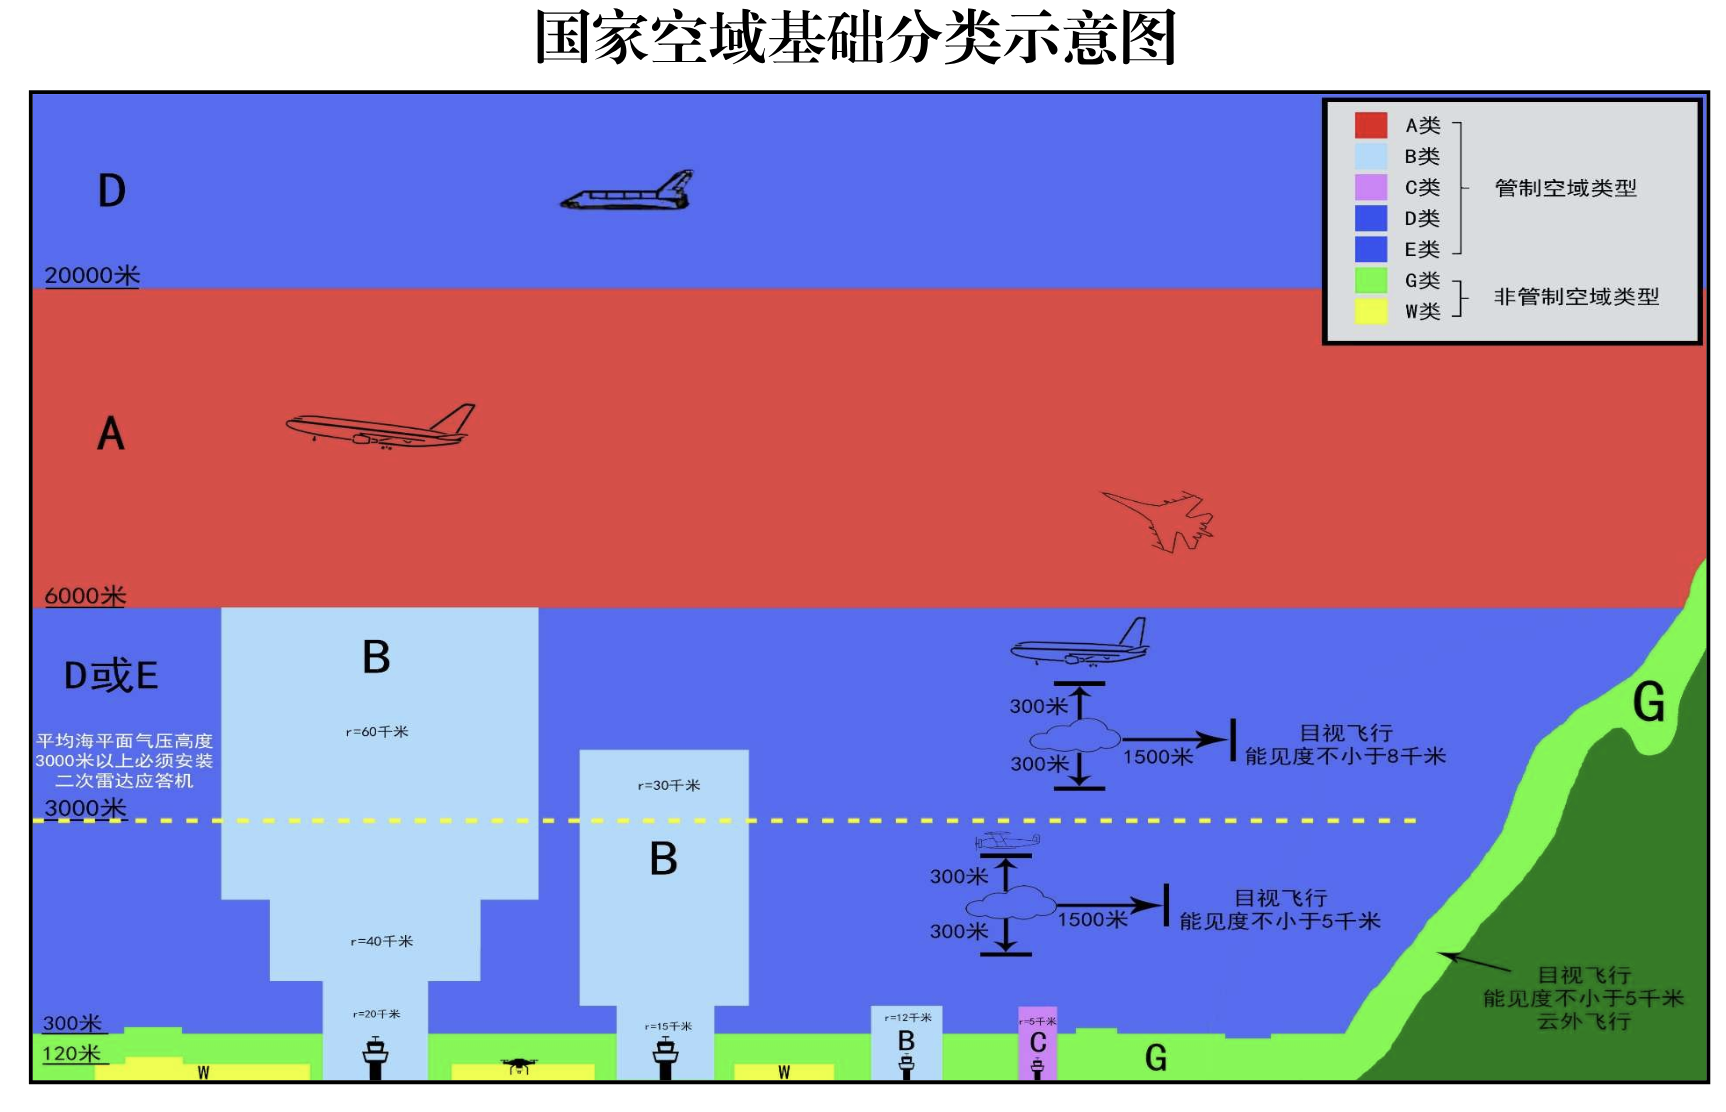 Image source: Civil Aviation Administration of China. Schematic diagram of basic classification of national airspace KellyOnTech